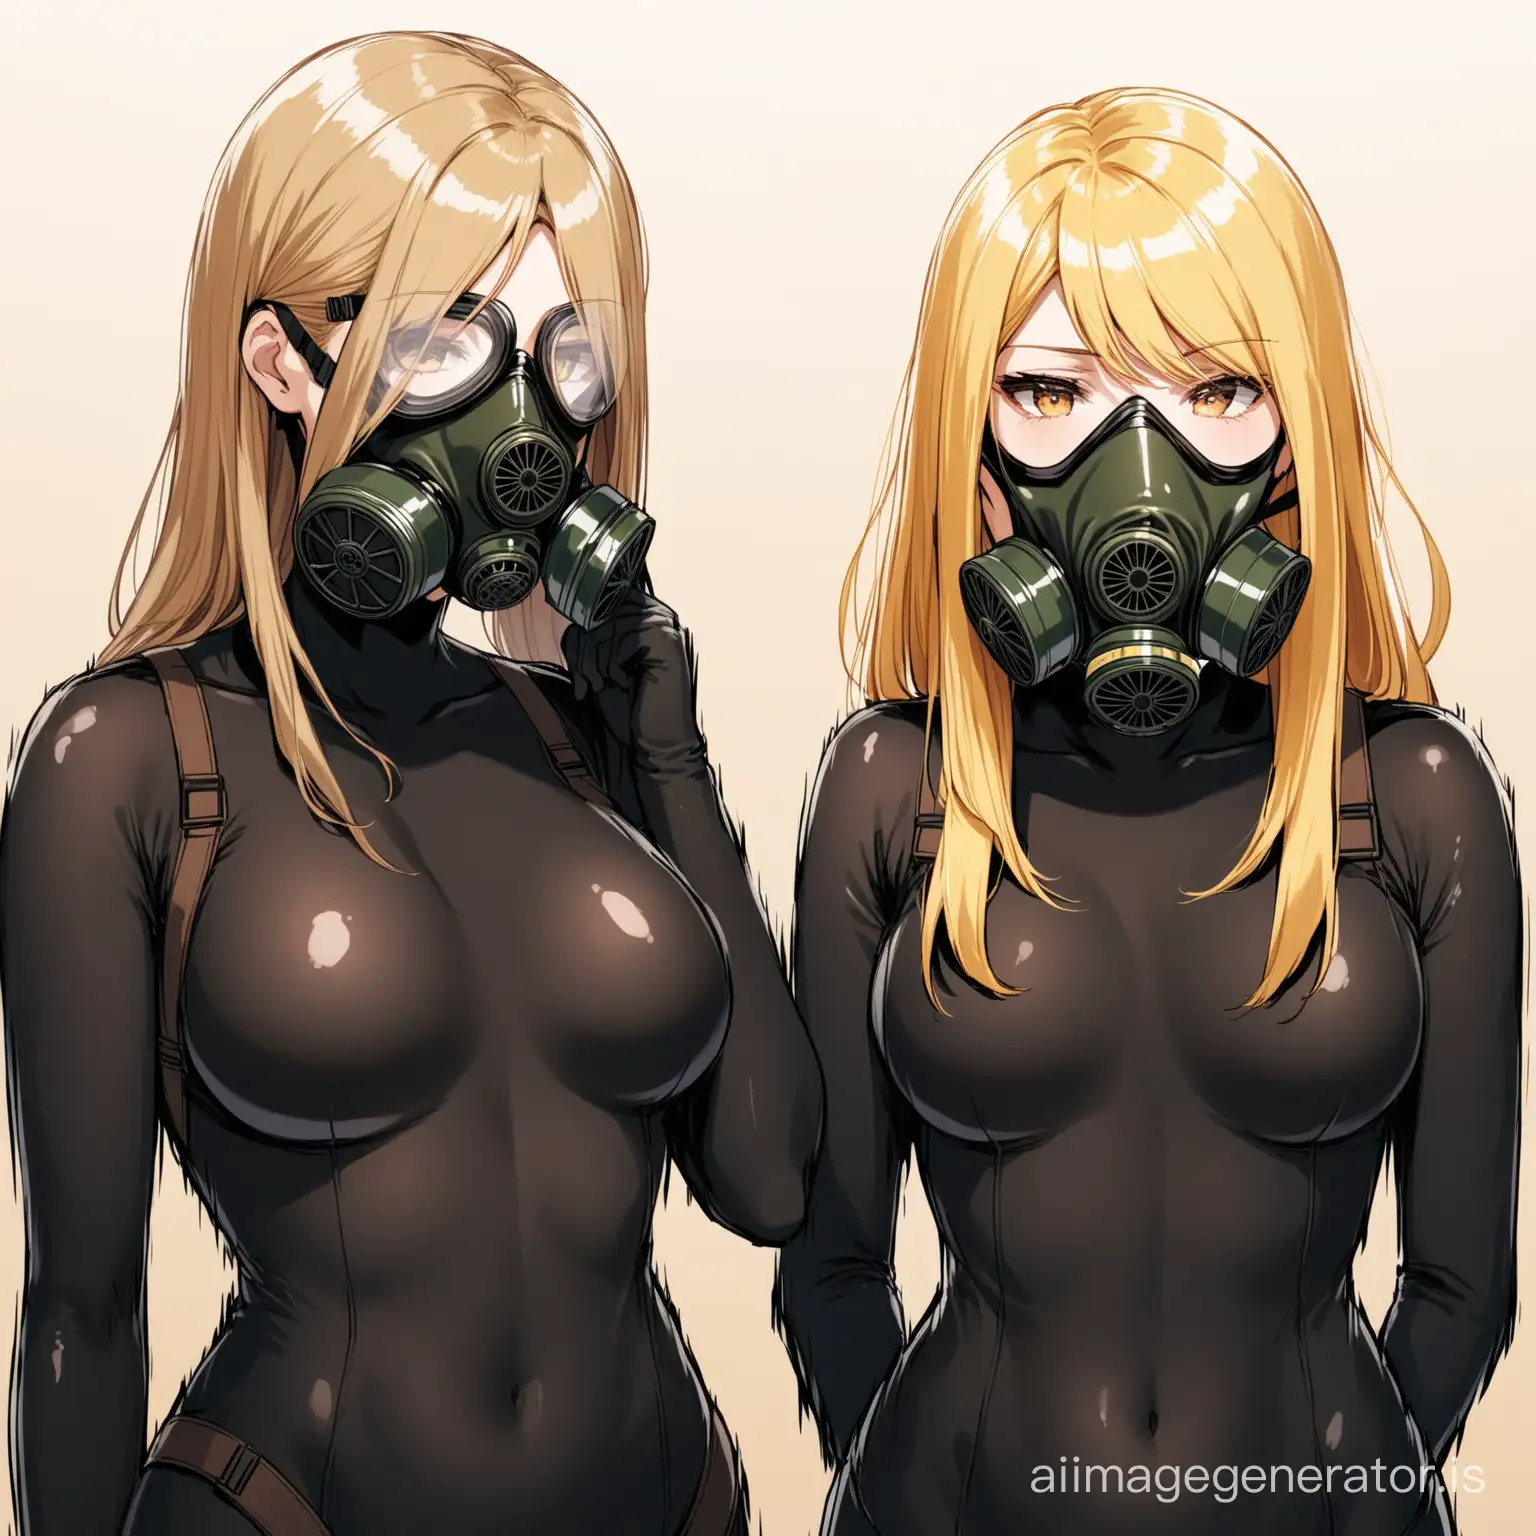 Two girls, one with brown and other with blonde hair, wearing black bodysuit and gas mask, having a breathing problems